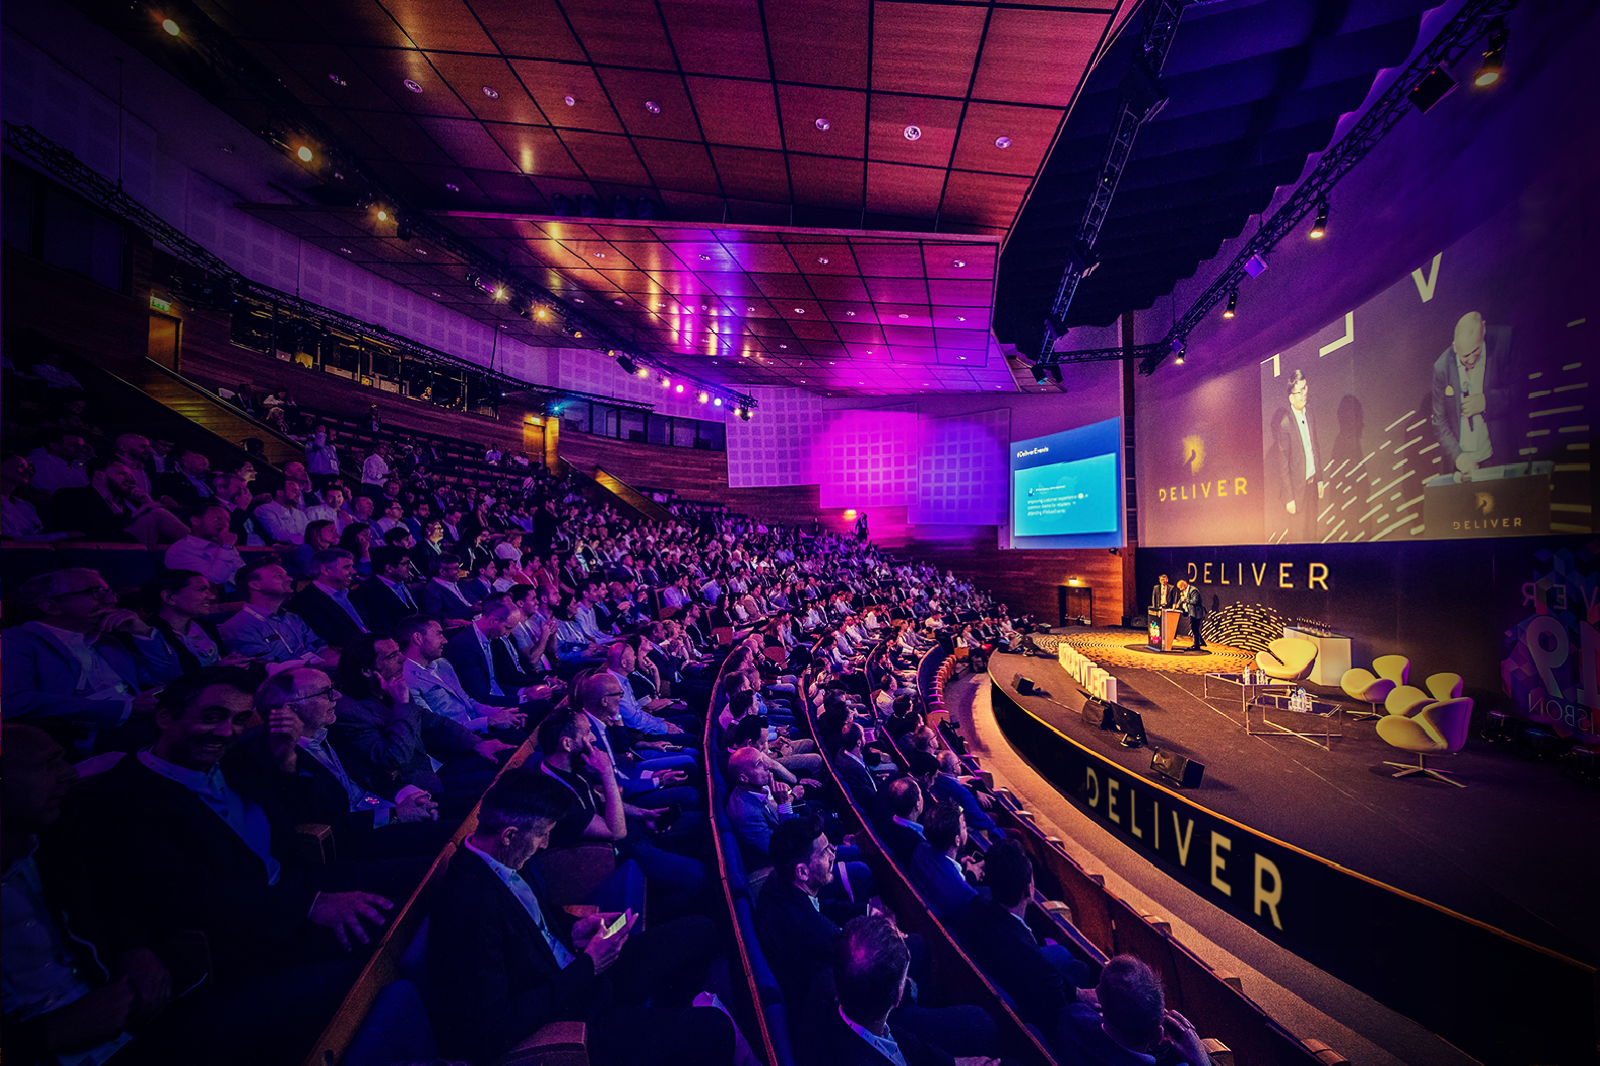 JOIN 1,500 EUROPEAN E-COMMERCE & LOGISTICS LEADERS UNDER ONE ROOF